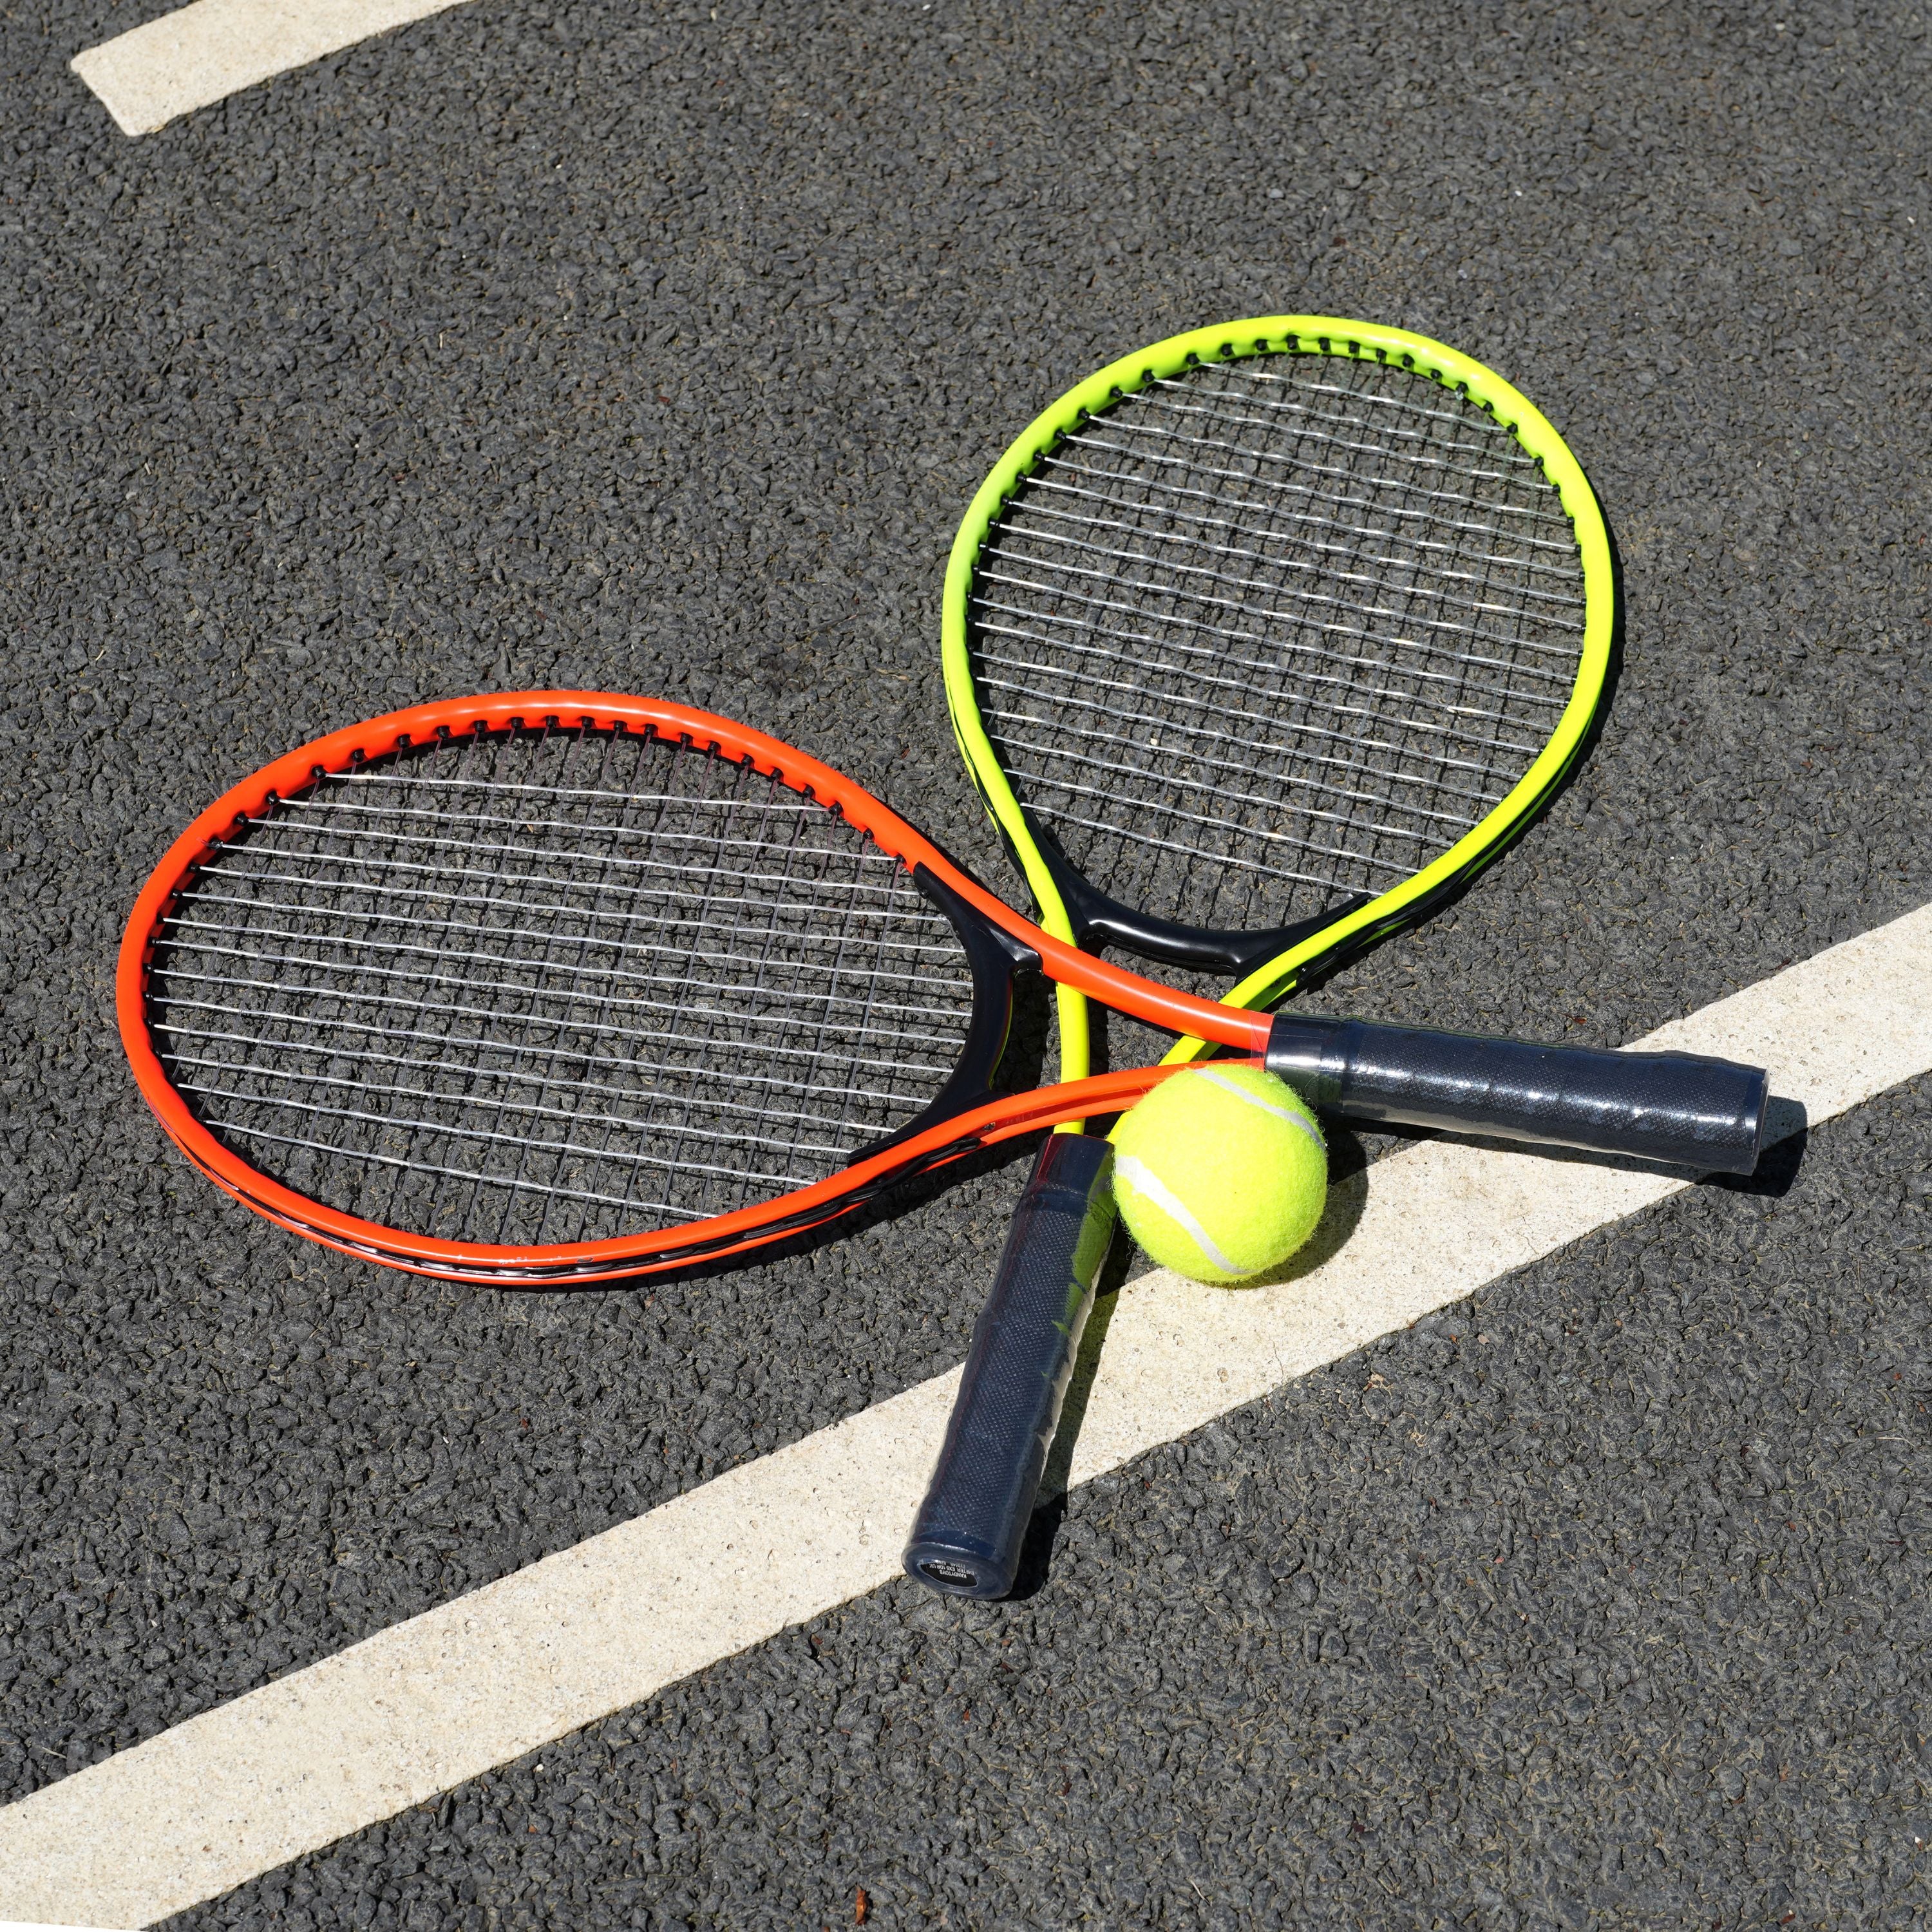 Metal Junior Tennis Set With 2 Racquets and Ball The Magic Toy Shop - The Magic Toy Shop